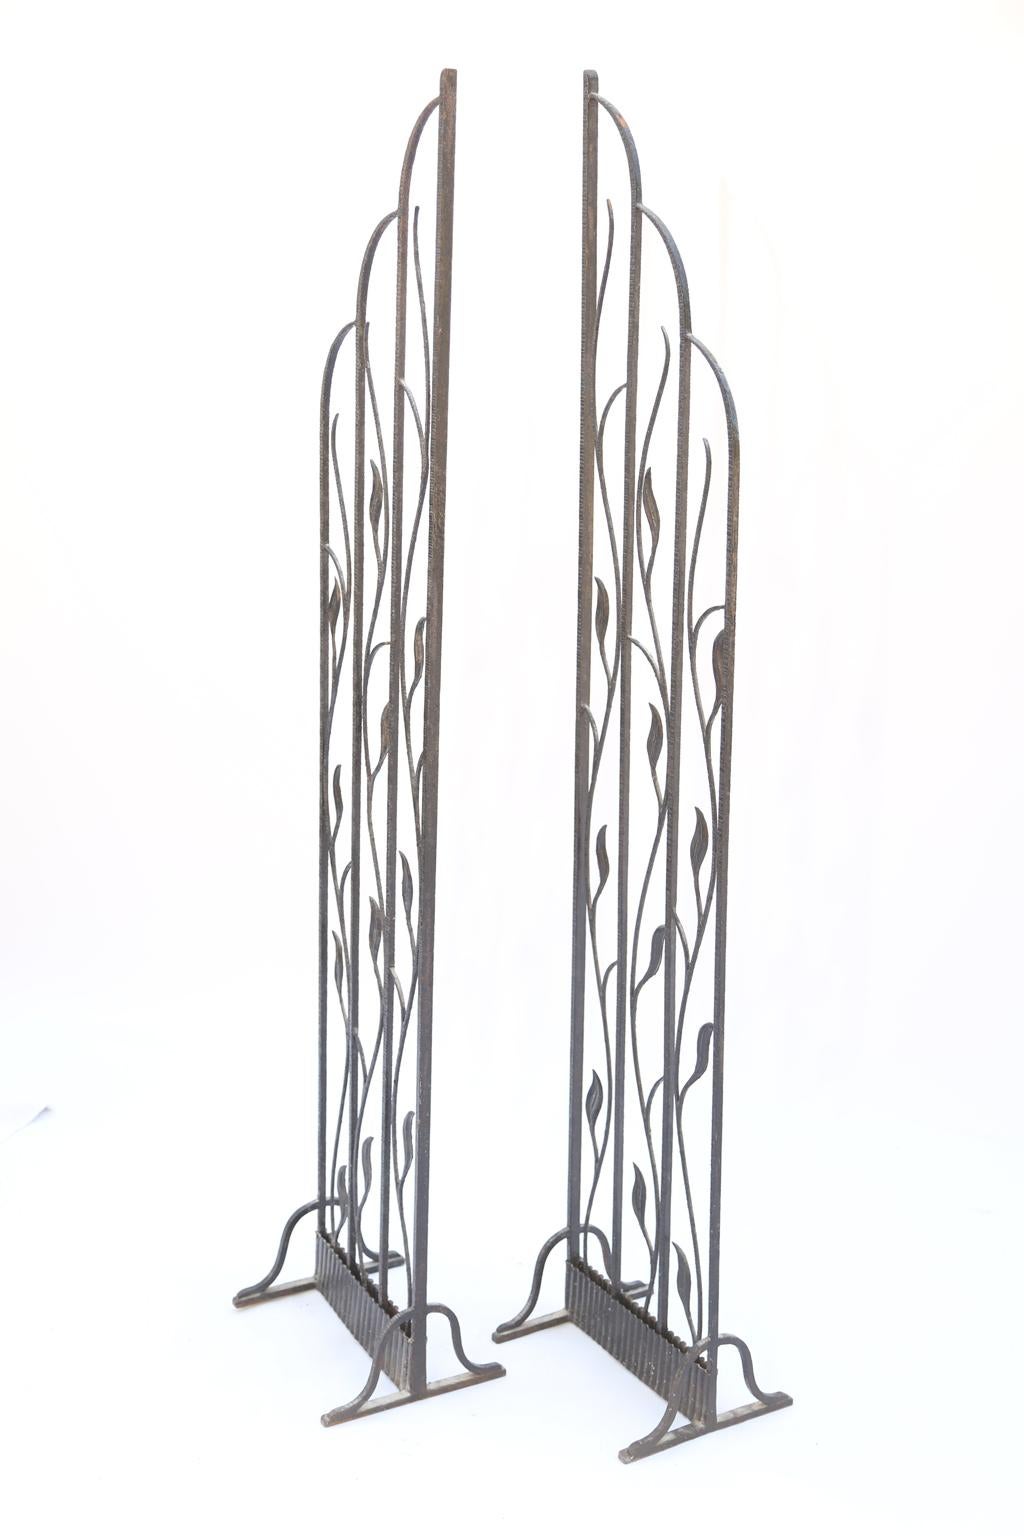 Pair of Art Deco Wrought Iron Room Dividers In Good Condition For Sale In West Palm Beach, FL